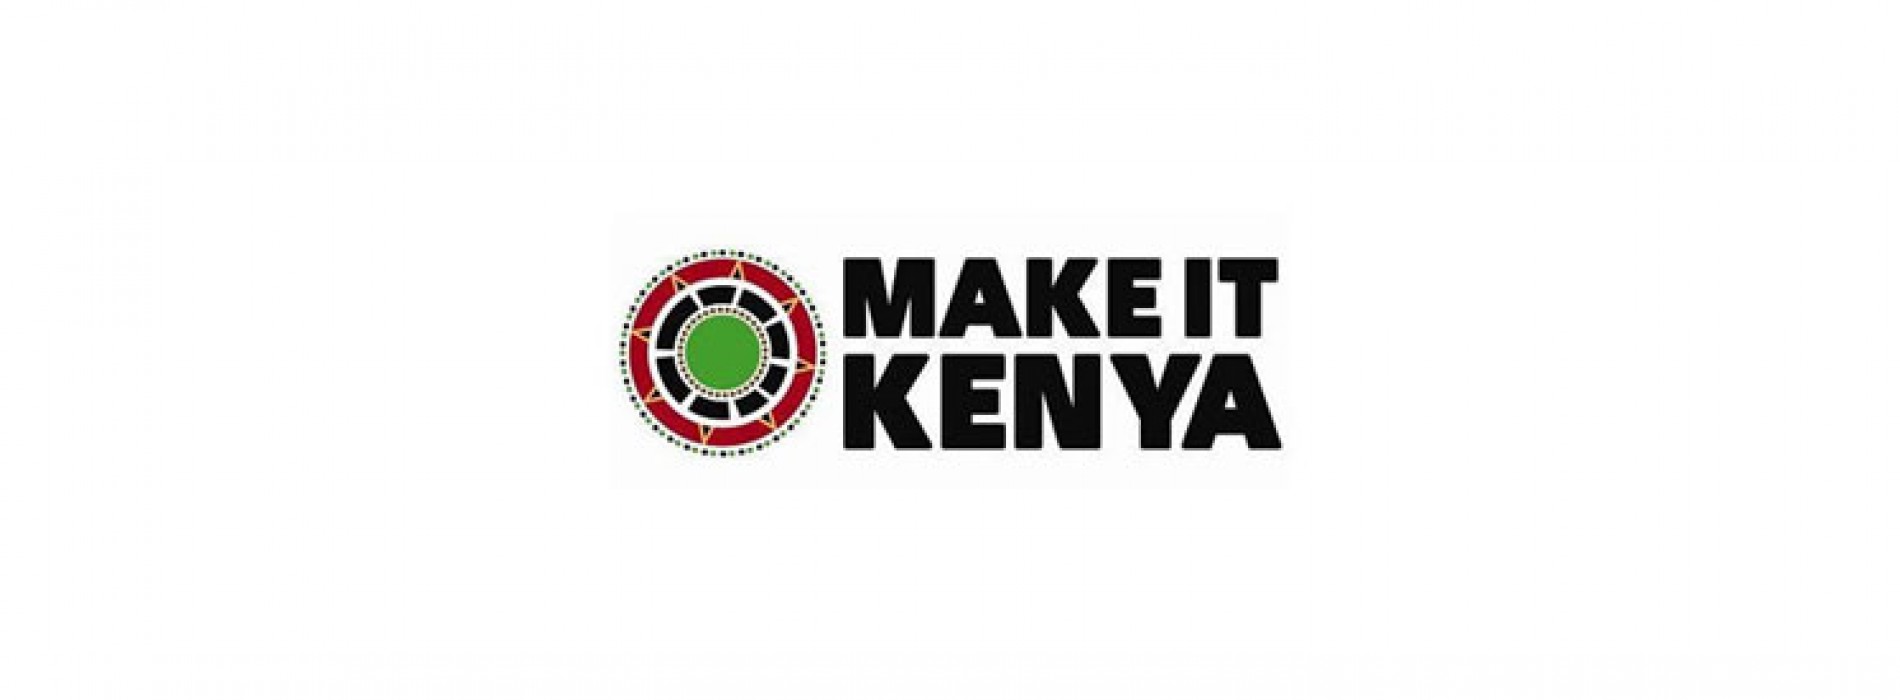 President of Kenya launches new international brand campaign to support tourism drive